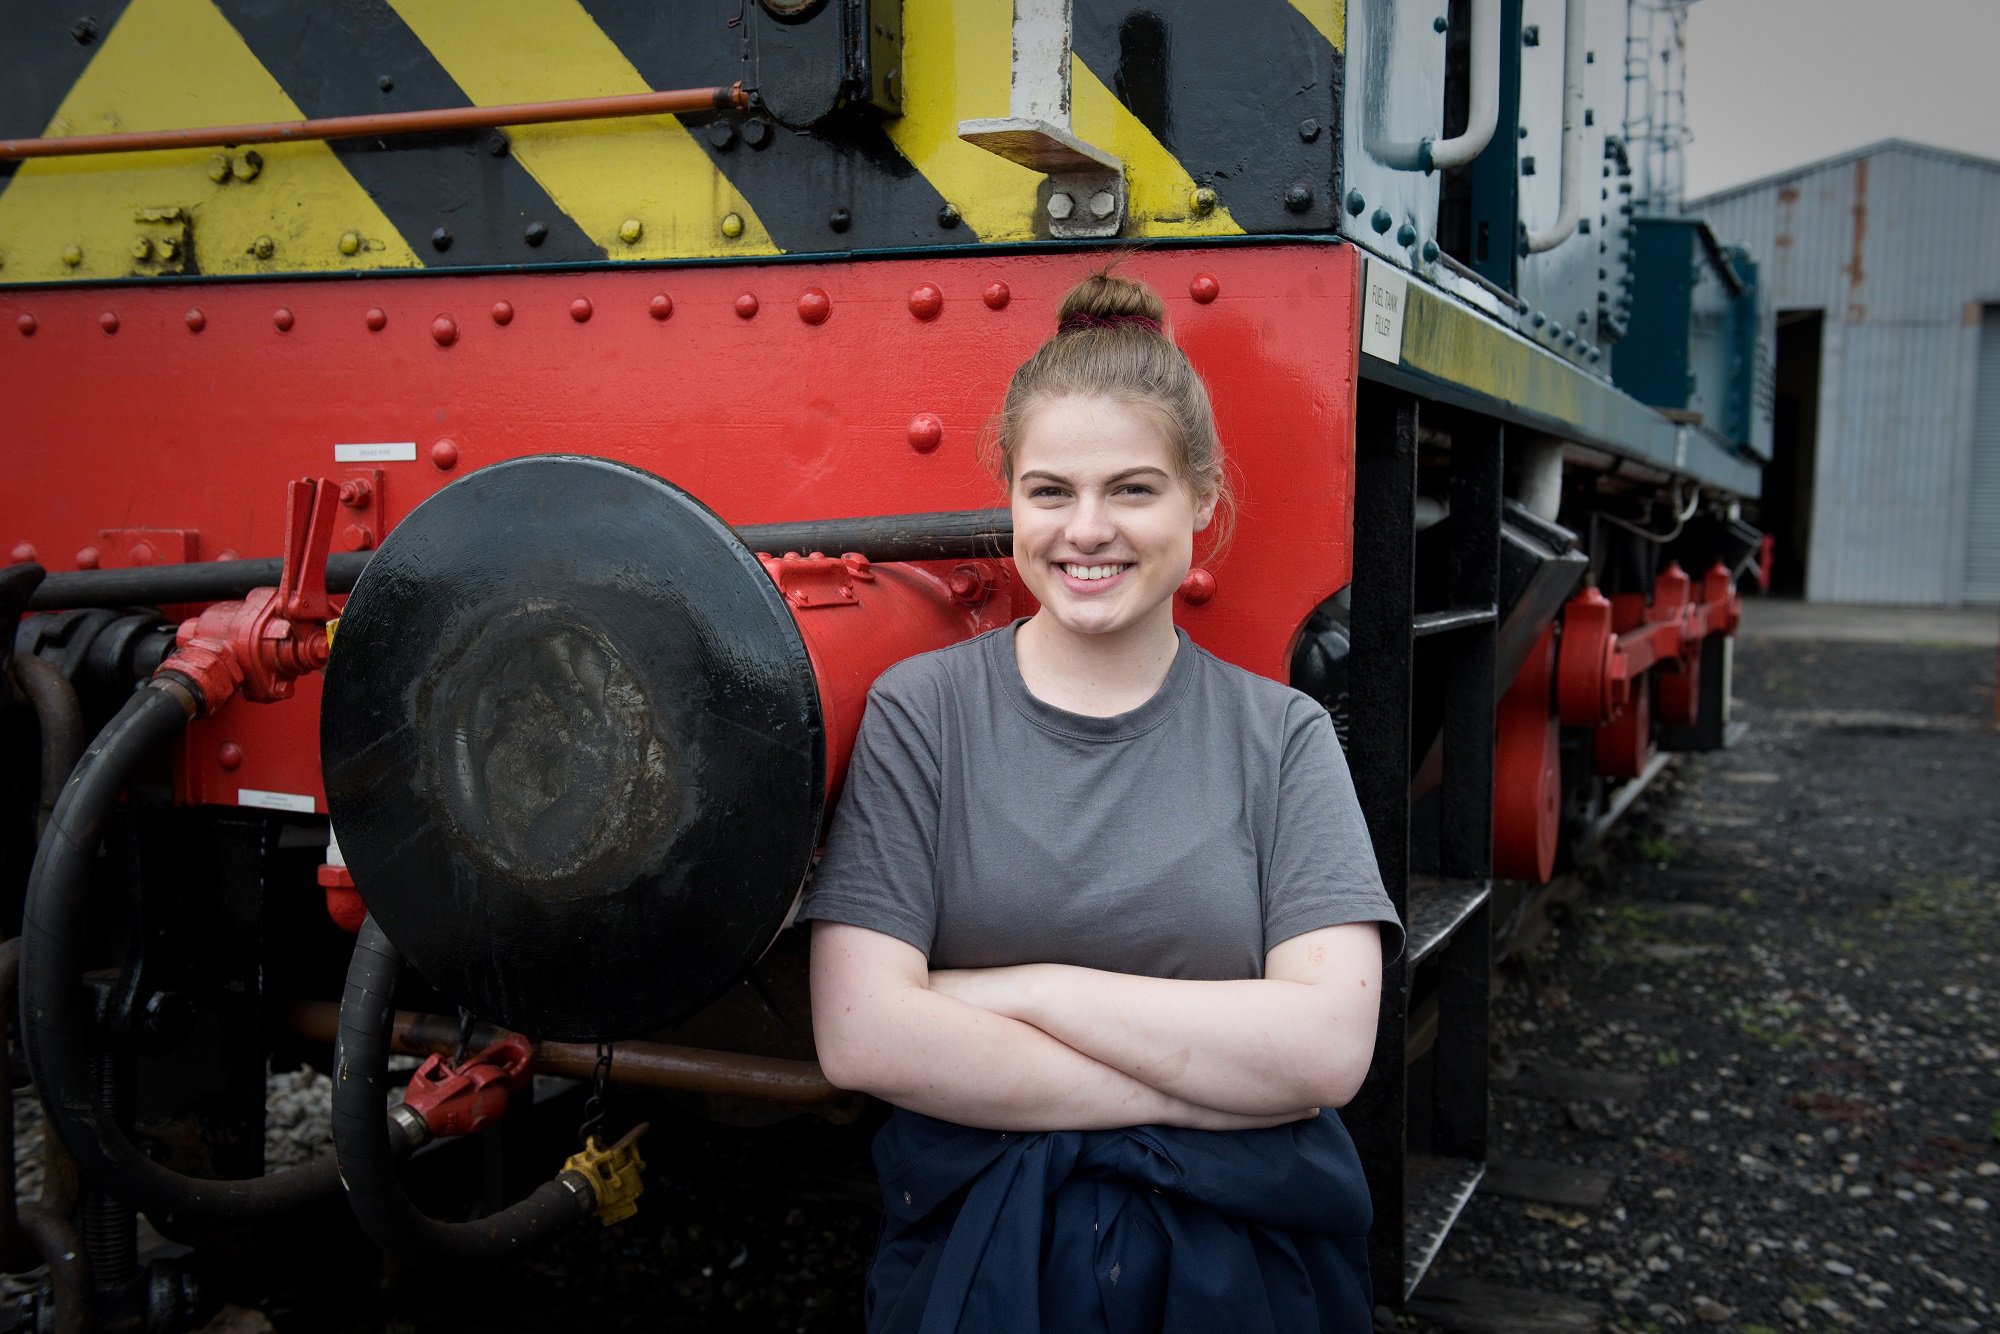 A young woman in overalls standing in front of a large diesel engine at a heritage railway.